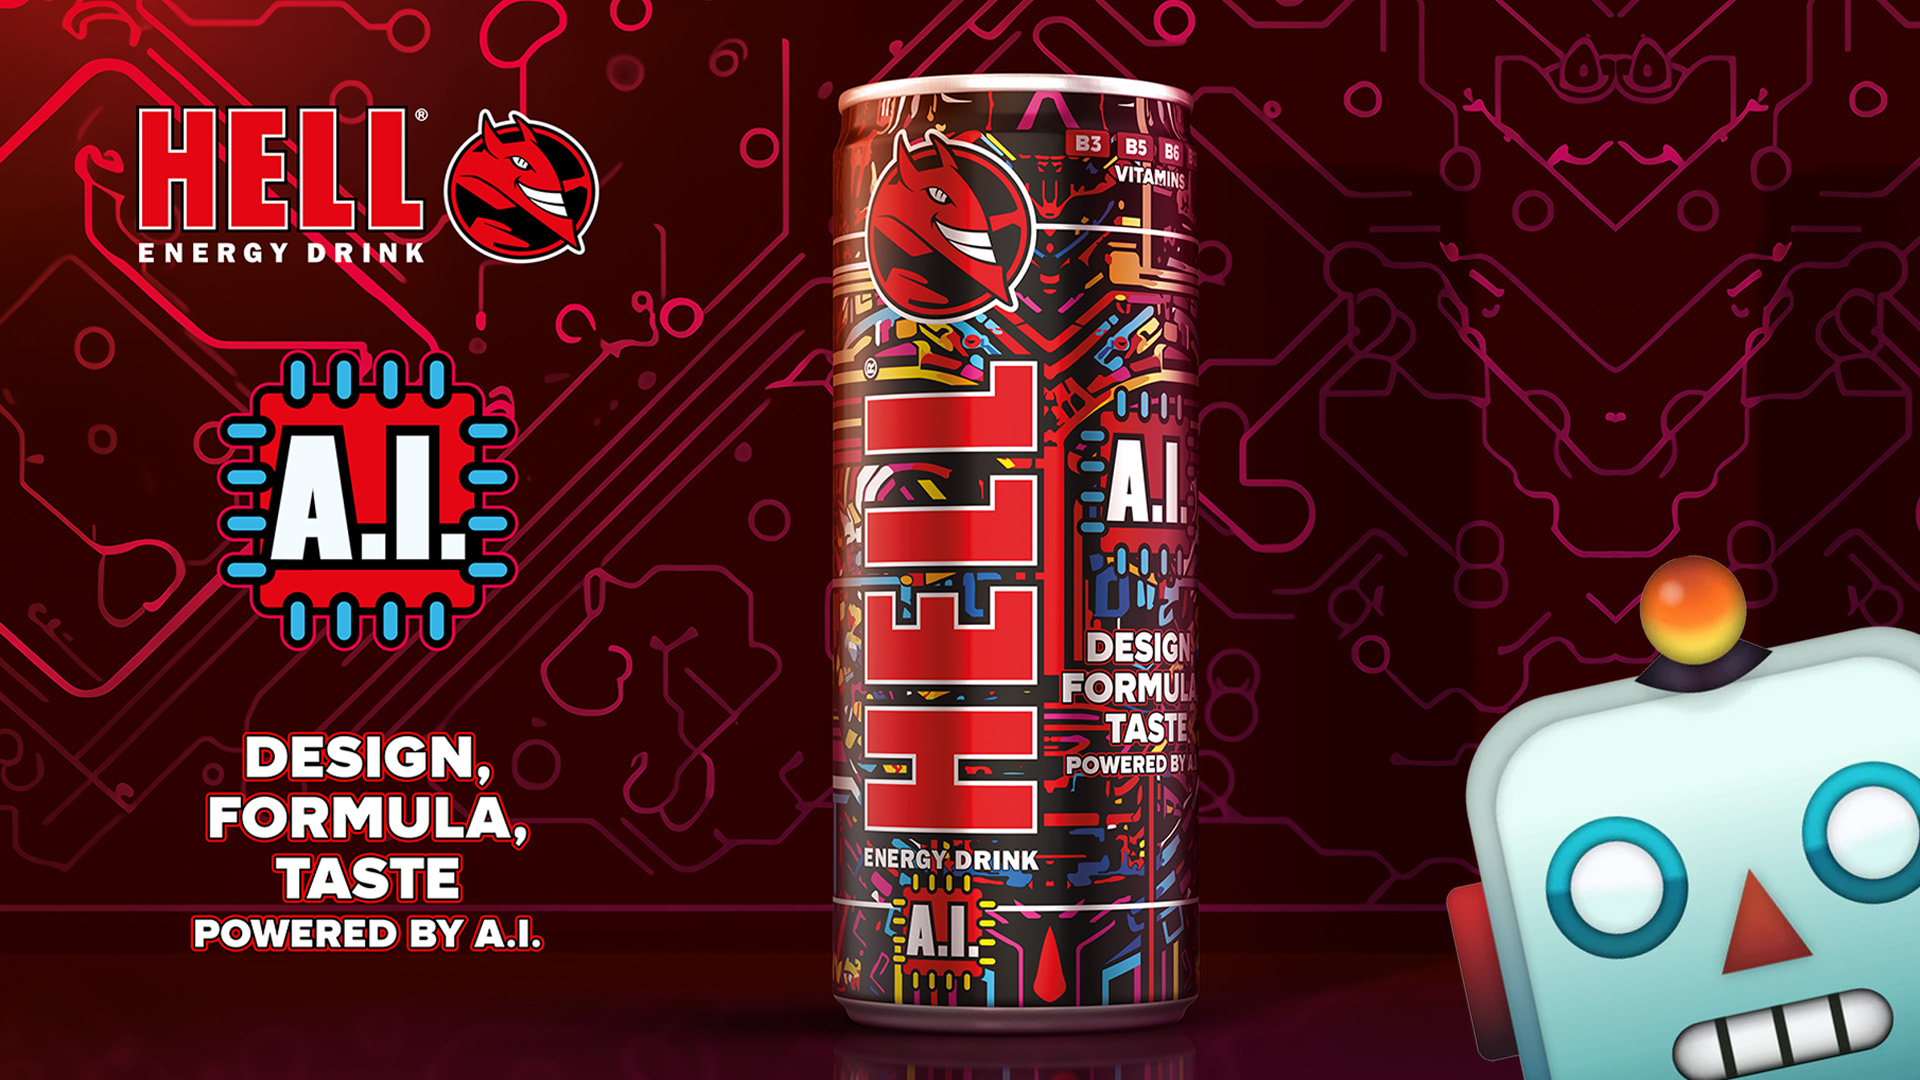 World sensation: A.I. developed and tasted it’s own energy drink